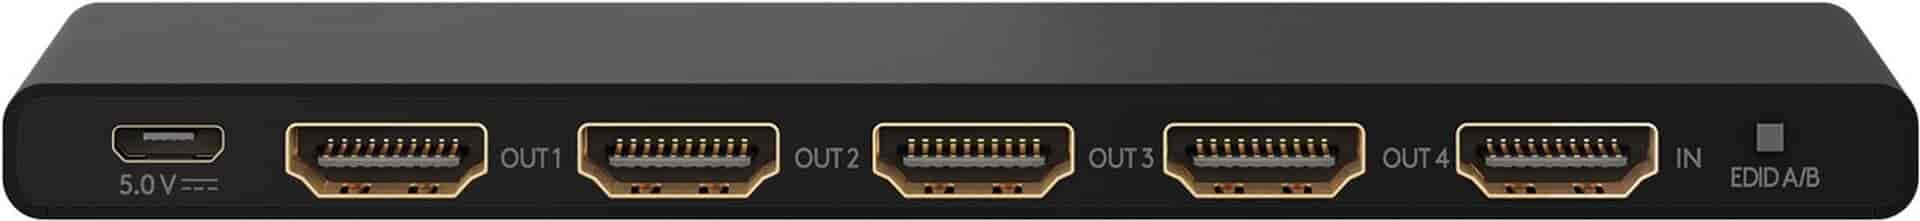 HDMI Splitter 1 to 4. Easily share HDMI signal to several screens, 4K UHD @ 60 Hz